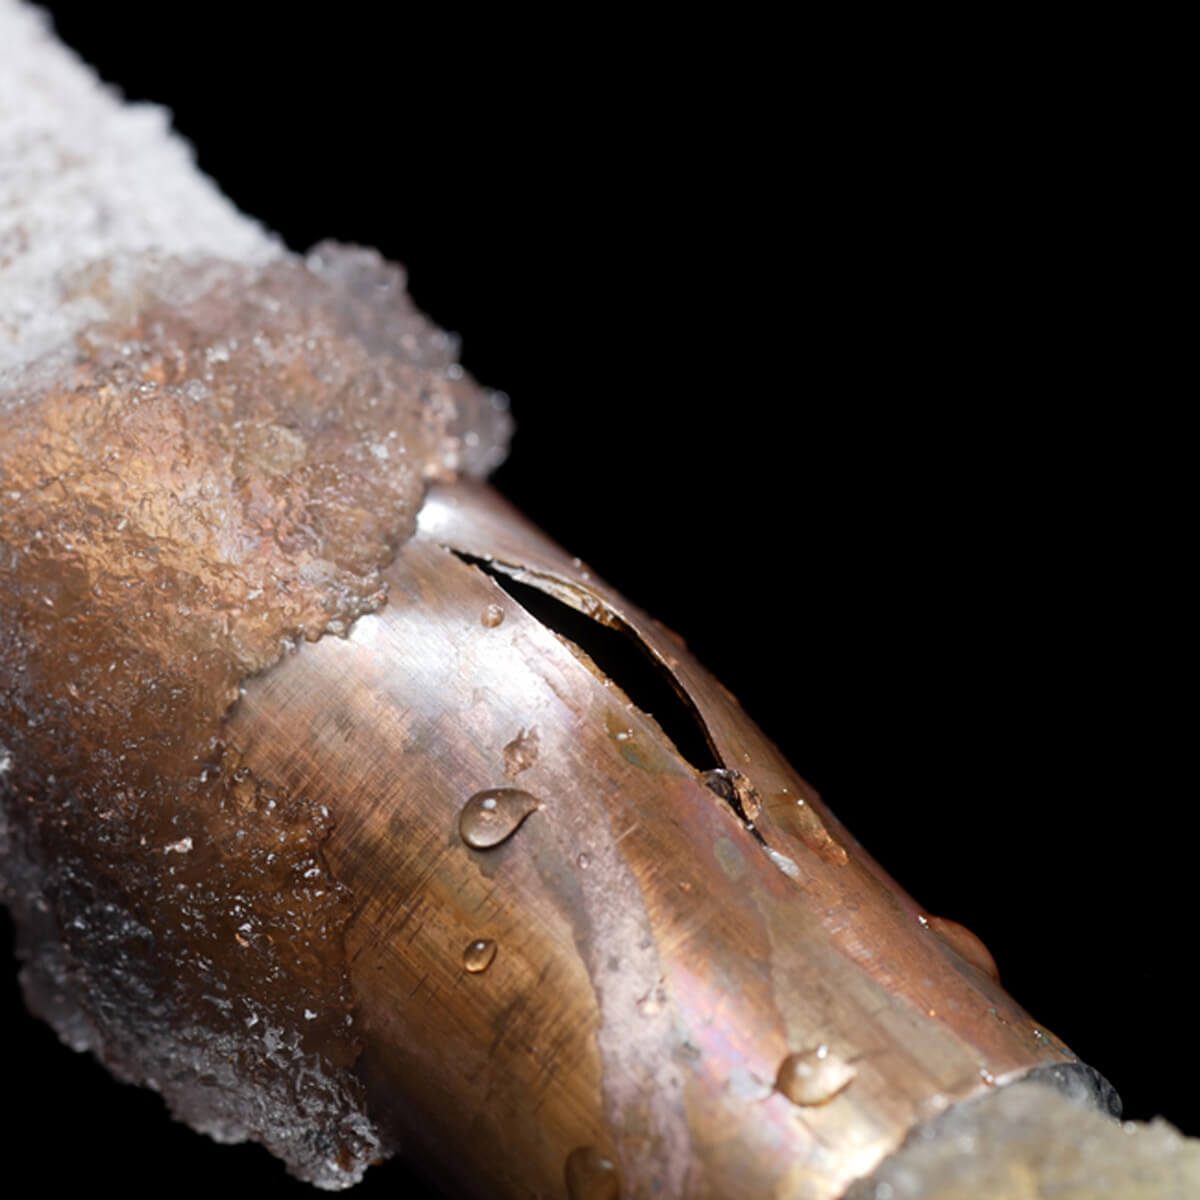 3 Ways to Keep Outside Pipes from Freezing - wikiHow